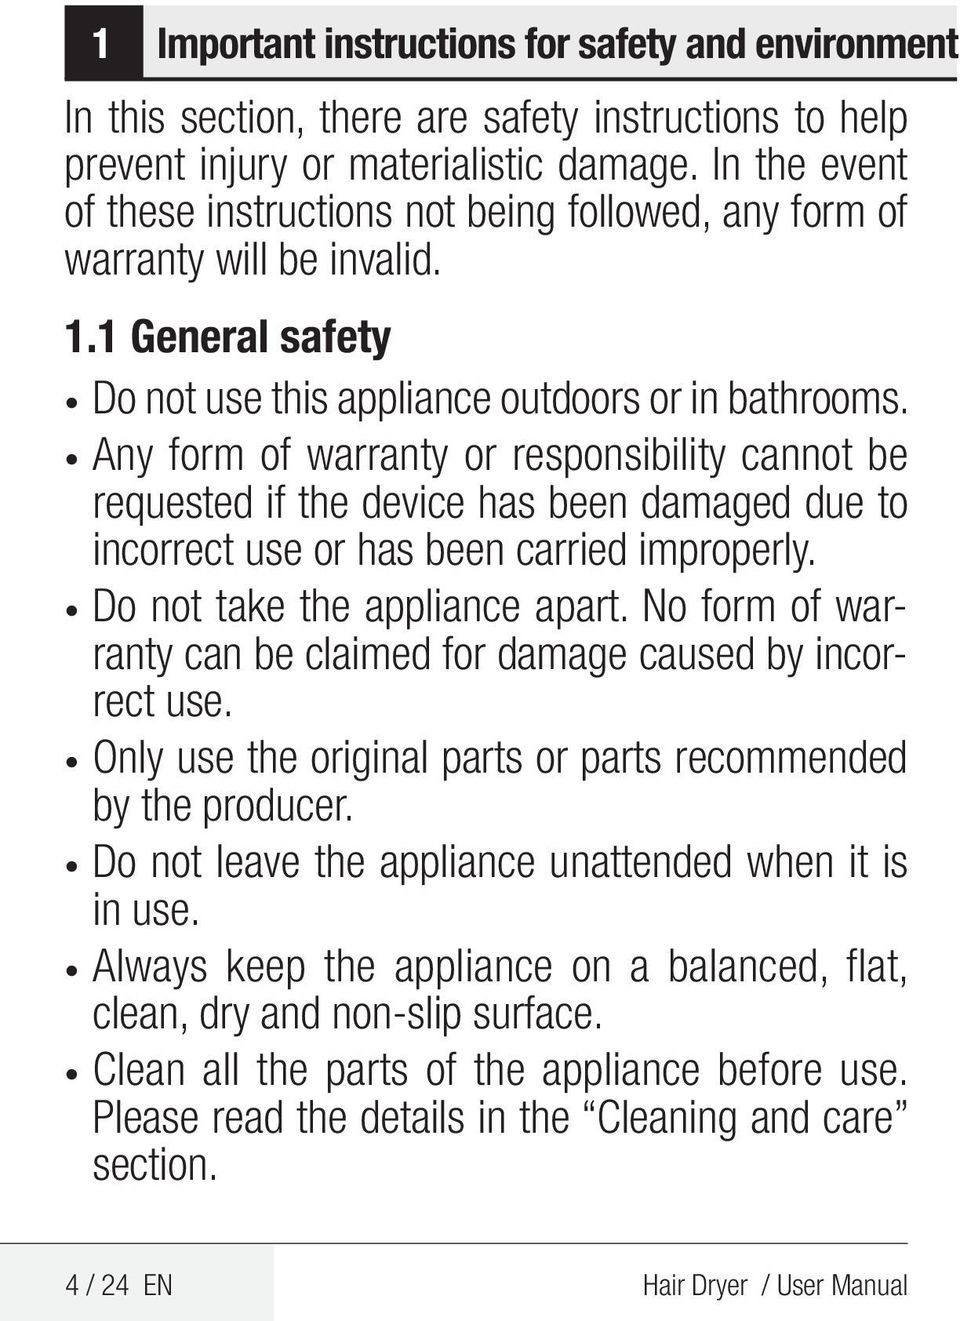 Any form of warranty or responsibility cannot be requested if the device has been damaged due to incorrect use or has been carried improperly. Do not take the appliance apart.